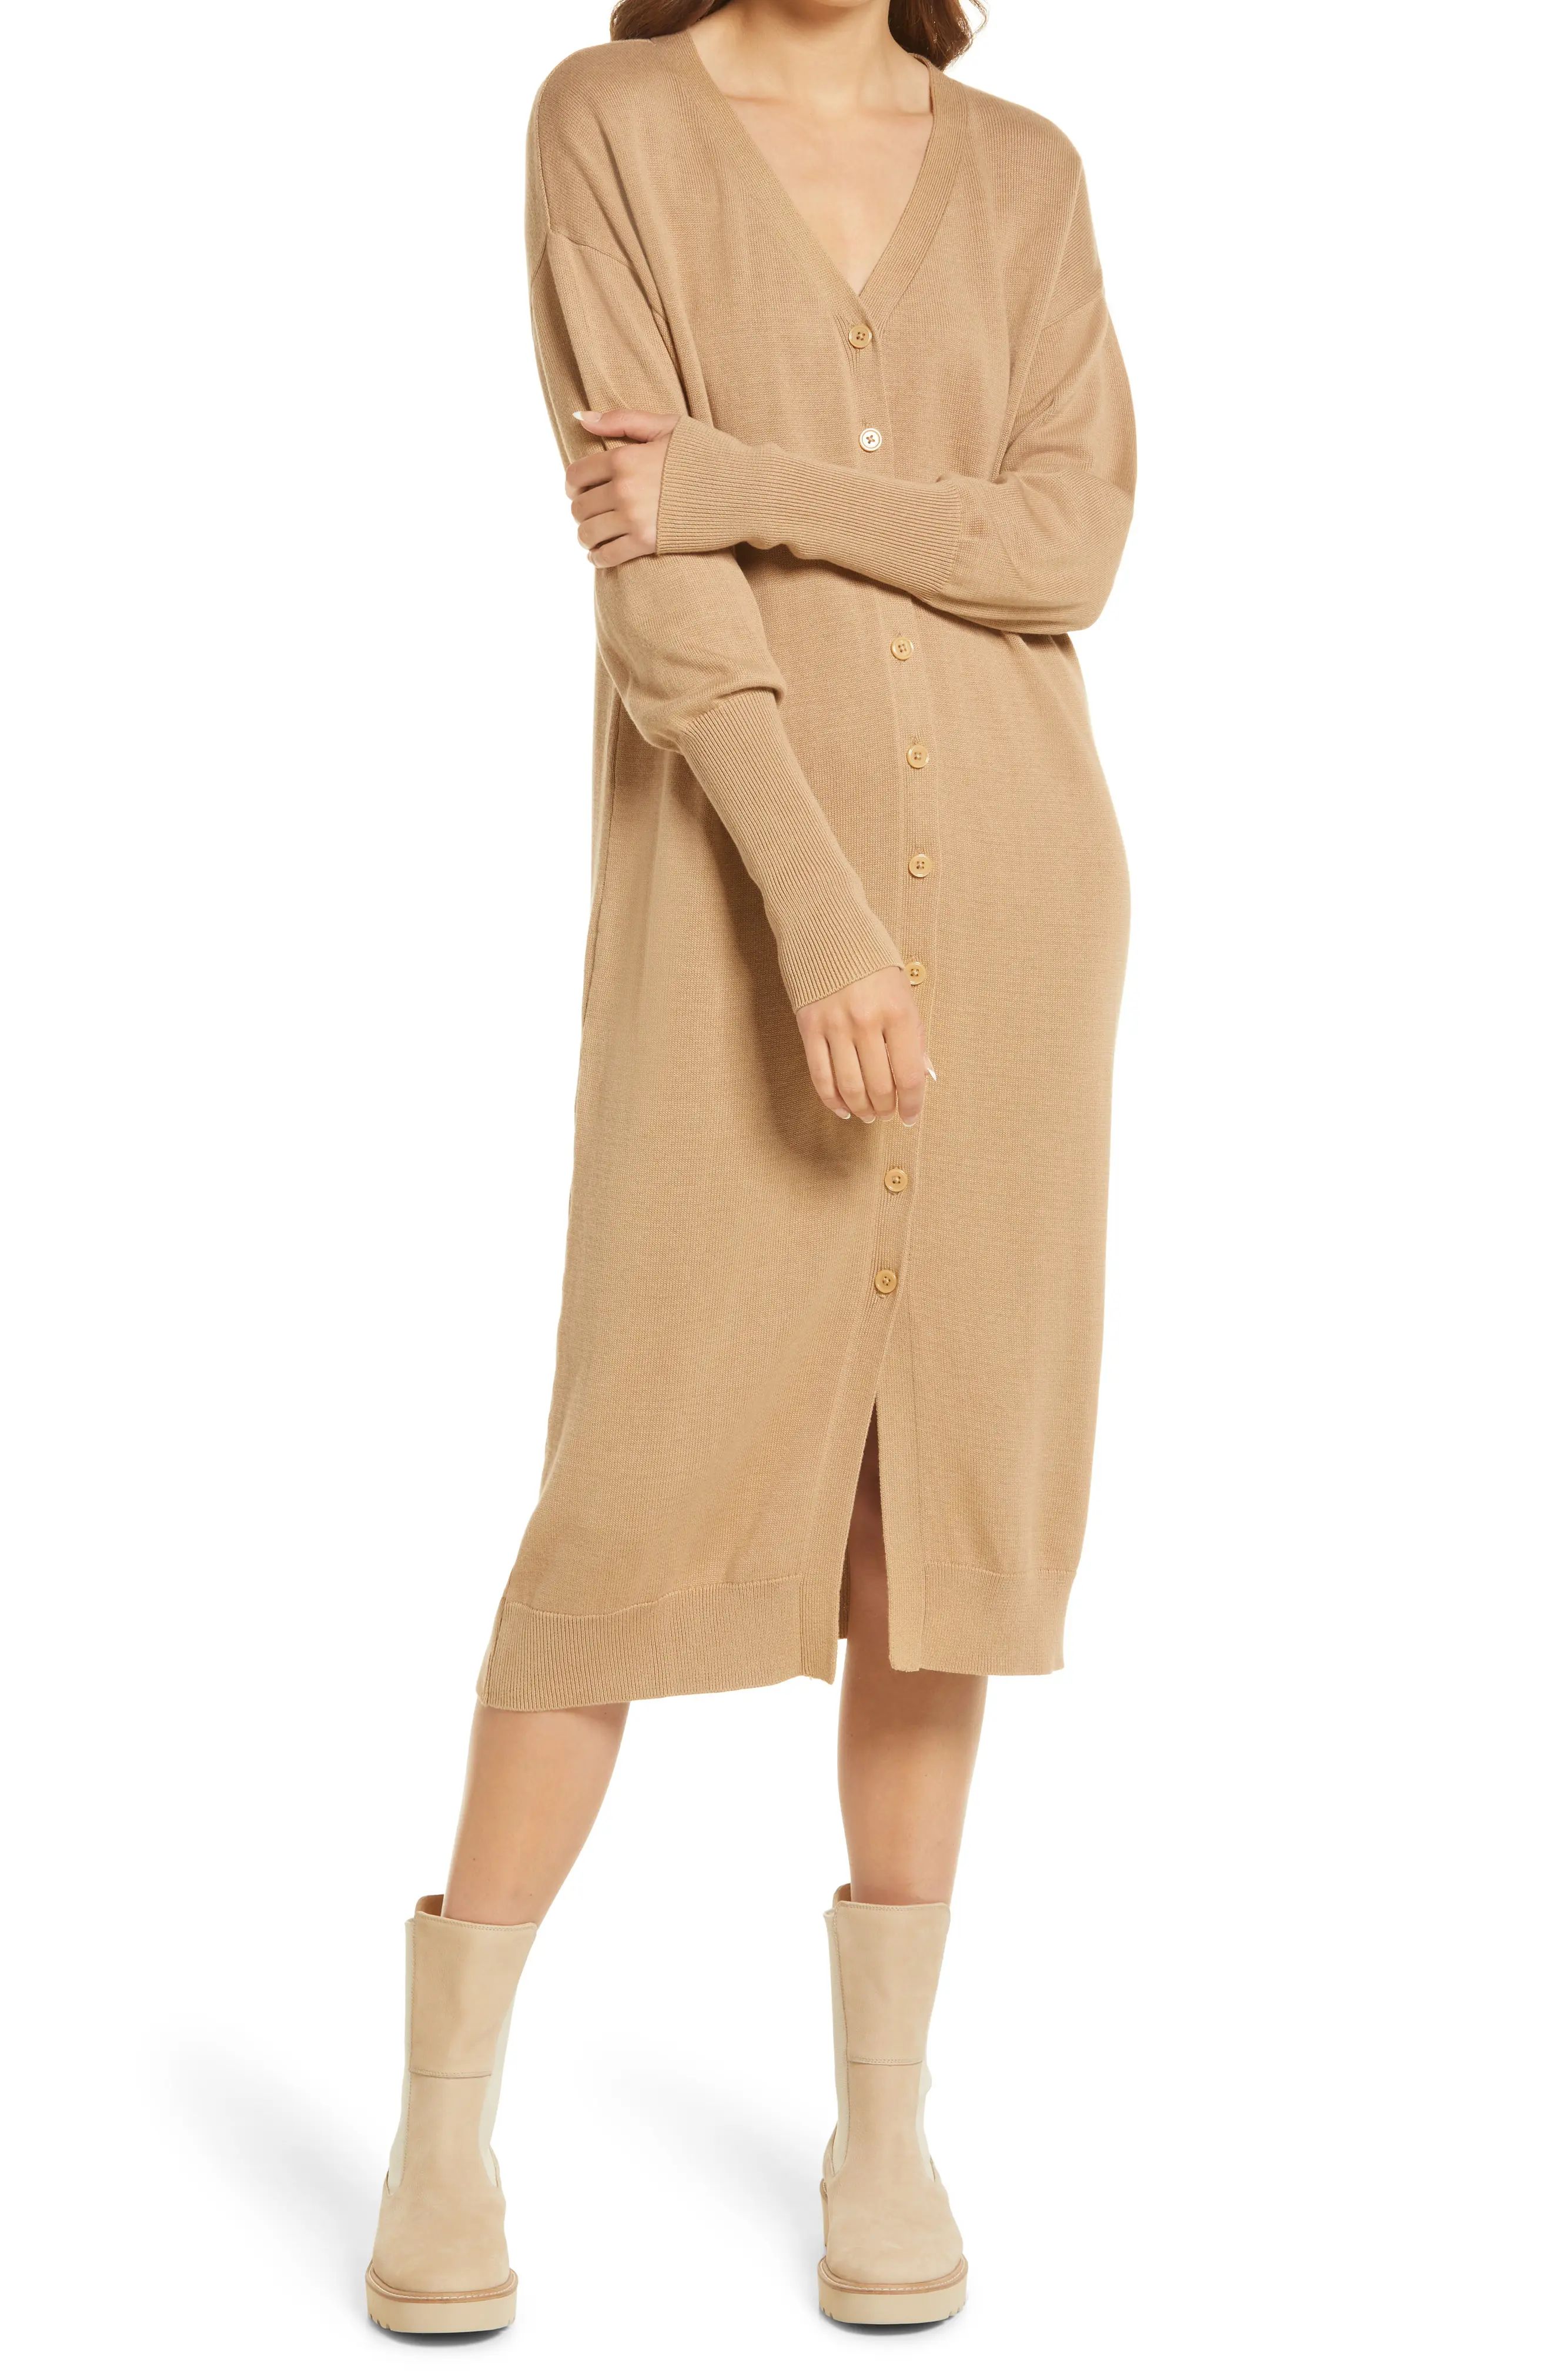 Treasure & Bond Button Front Sweater Dress, Size Small in Tan Dale at Nordstrom | Nordstrom